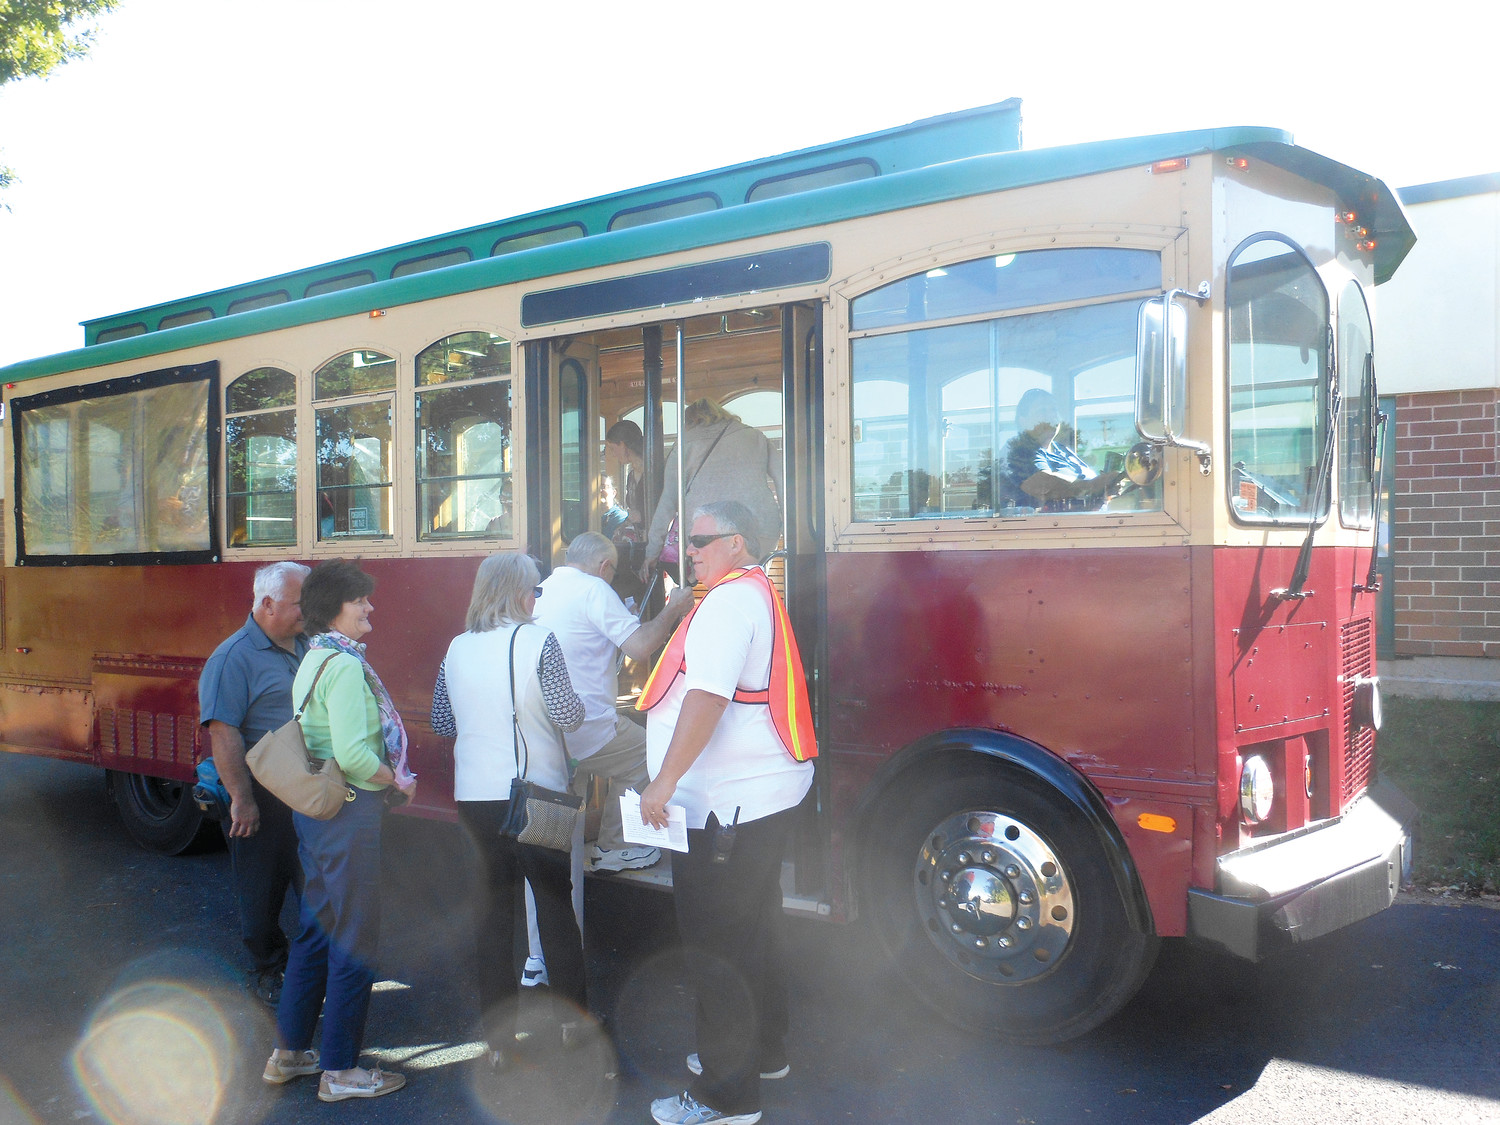 St. Thomas More parishioner Gary Tudino guides visiting pilgrims onto a trolley to take them from Narragansett High School to the church. Because police shut down Rockland Street to manage crowding, pilgrims relied upon trolleys to shuttle them to and from the church.